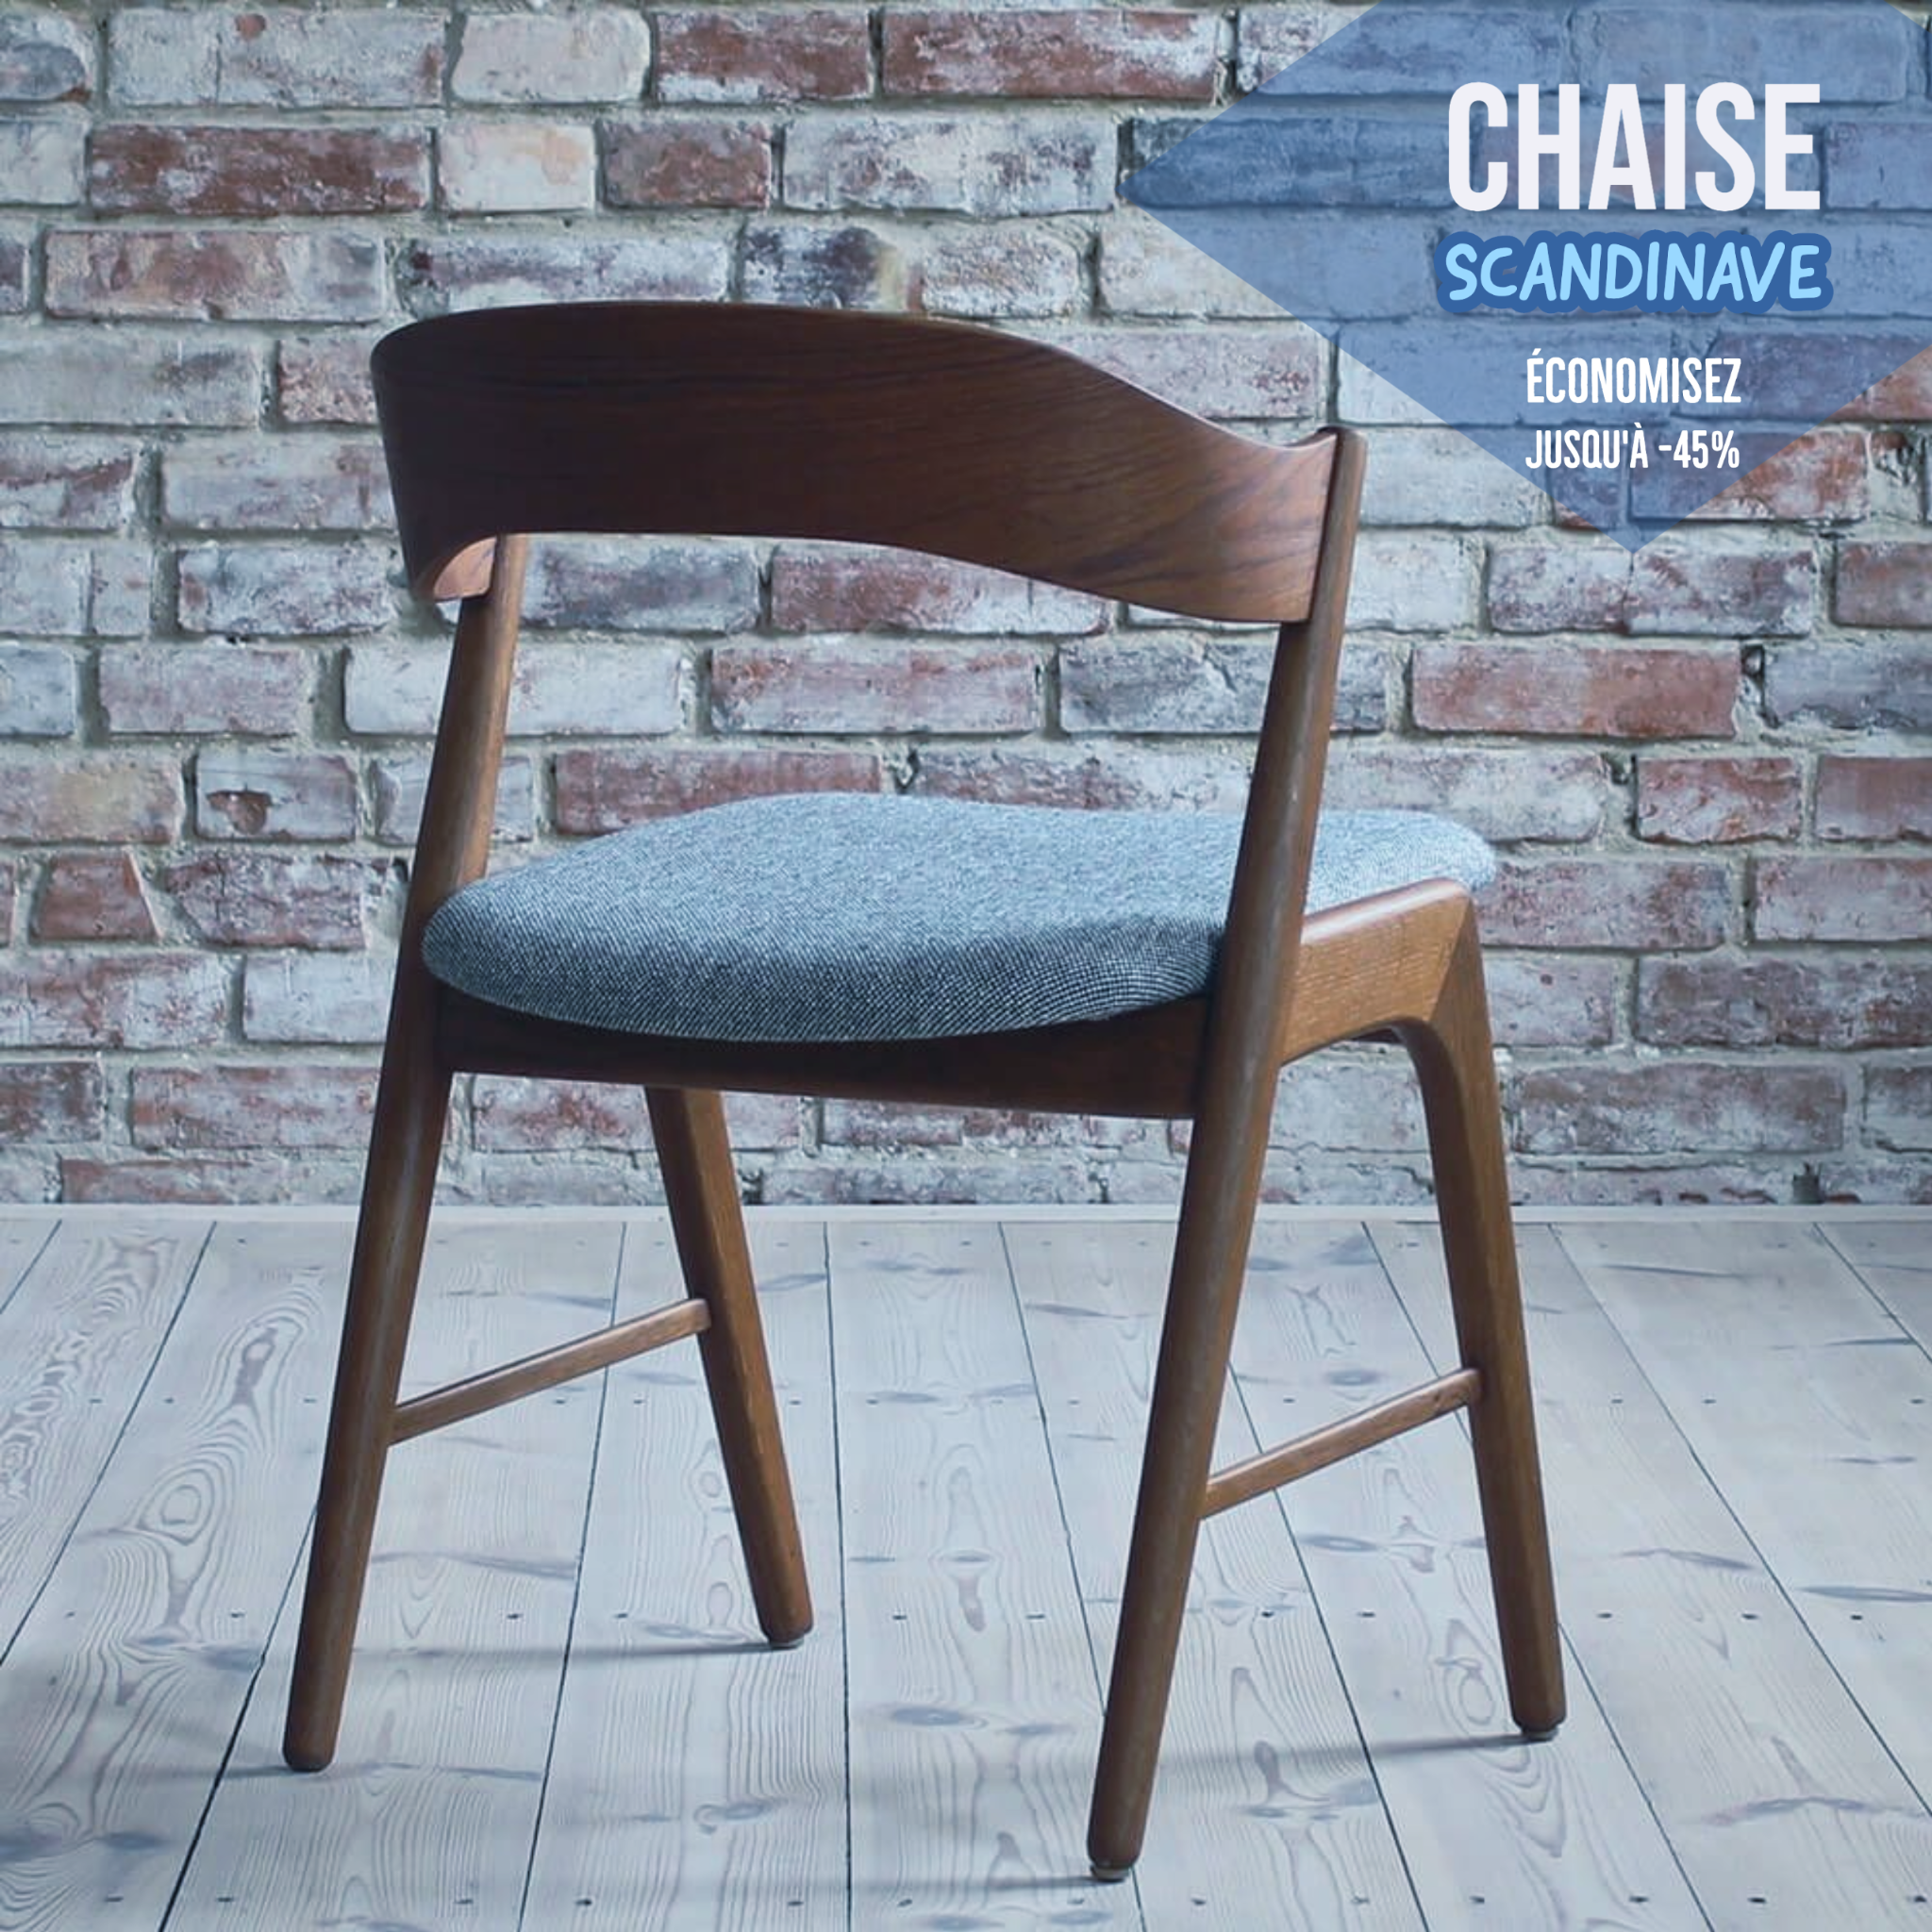 get_the_best_Chaise Scandinave_ad